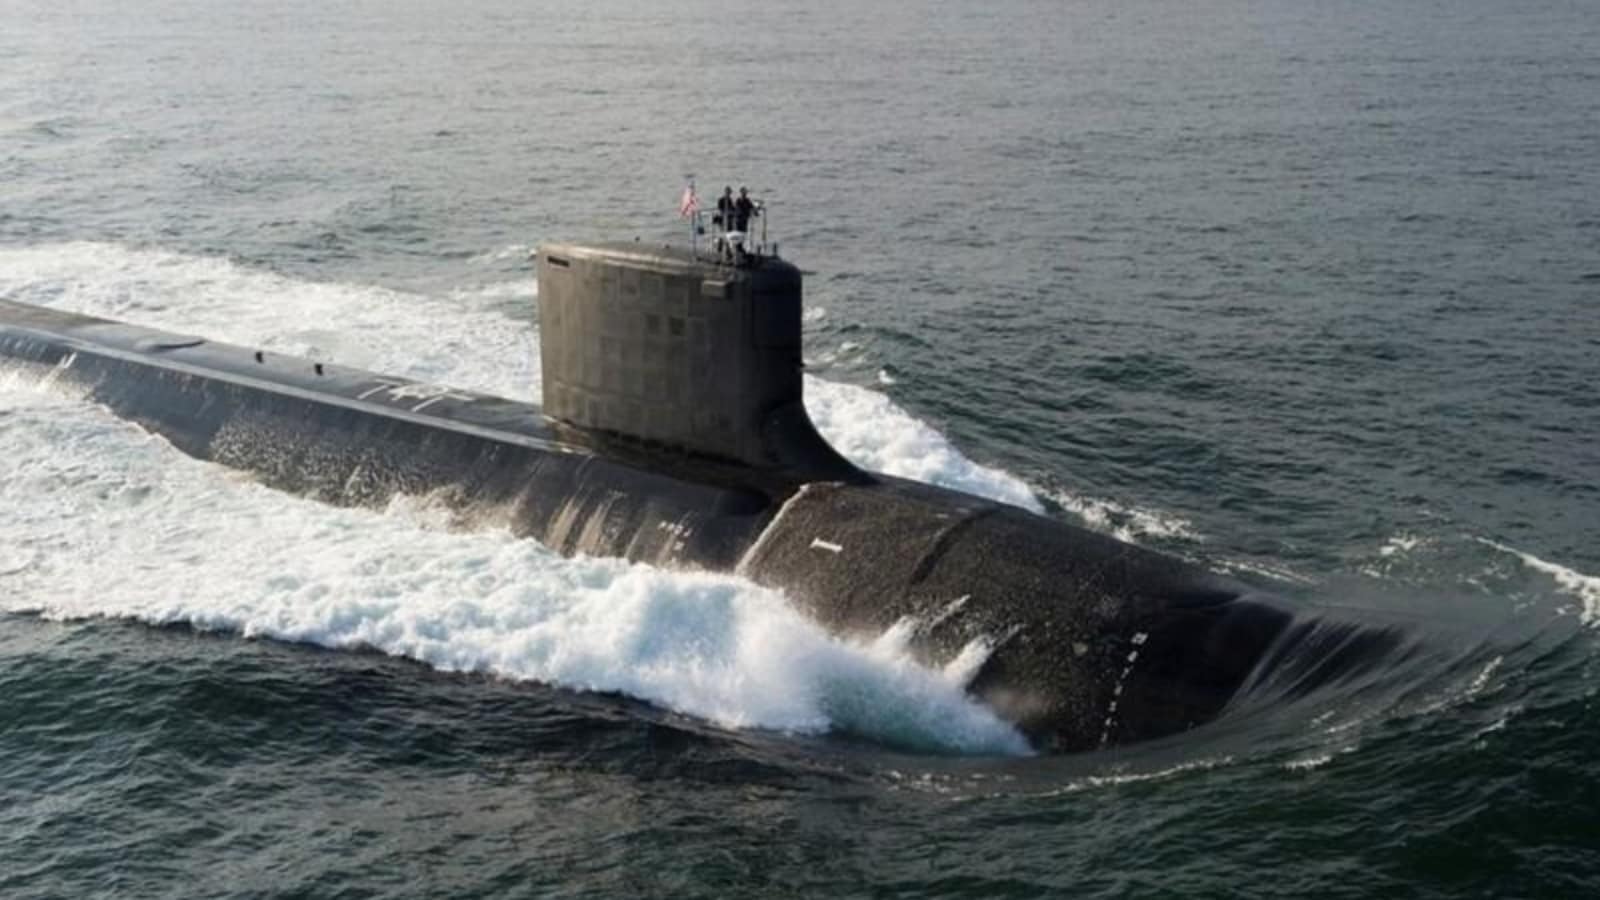 Hiding secret of nuclear submarine in sandwiches and chewing gum